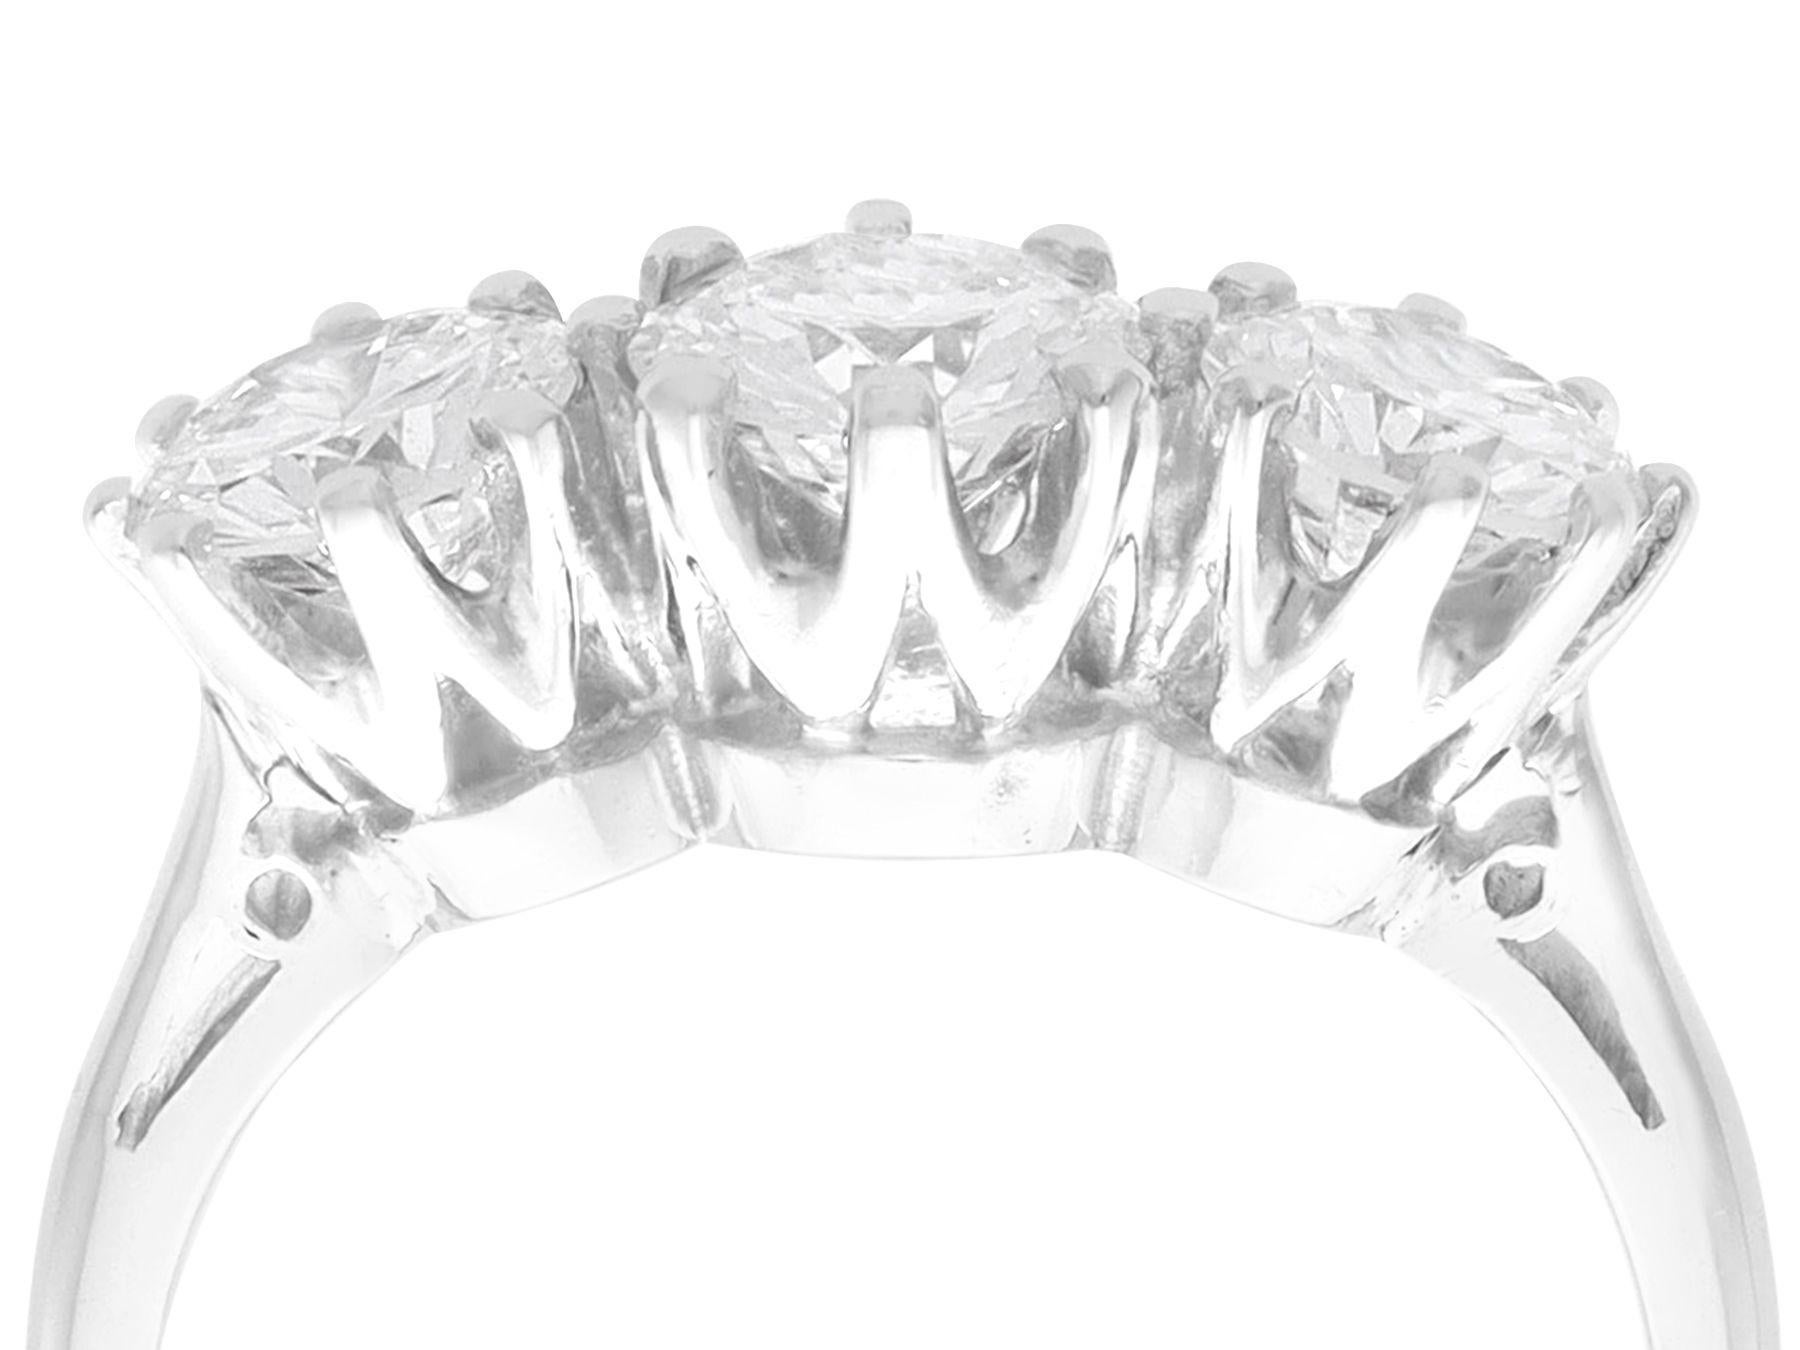 A stunning, fine and impressive vintage 1.67 carat diamond and platinum trilogy dress ring; part of our diverse vintage jewelry and estate jewelry collections

This stunning vintage trilogy diamond ring has been crafted in platinum.

The pierced